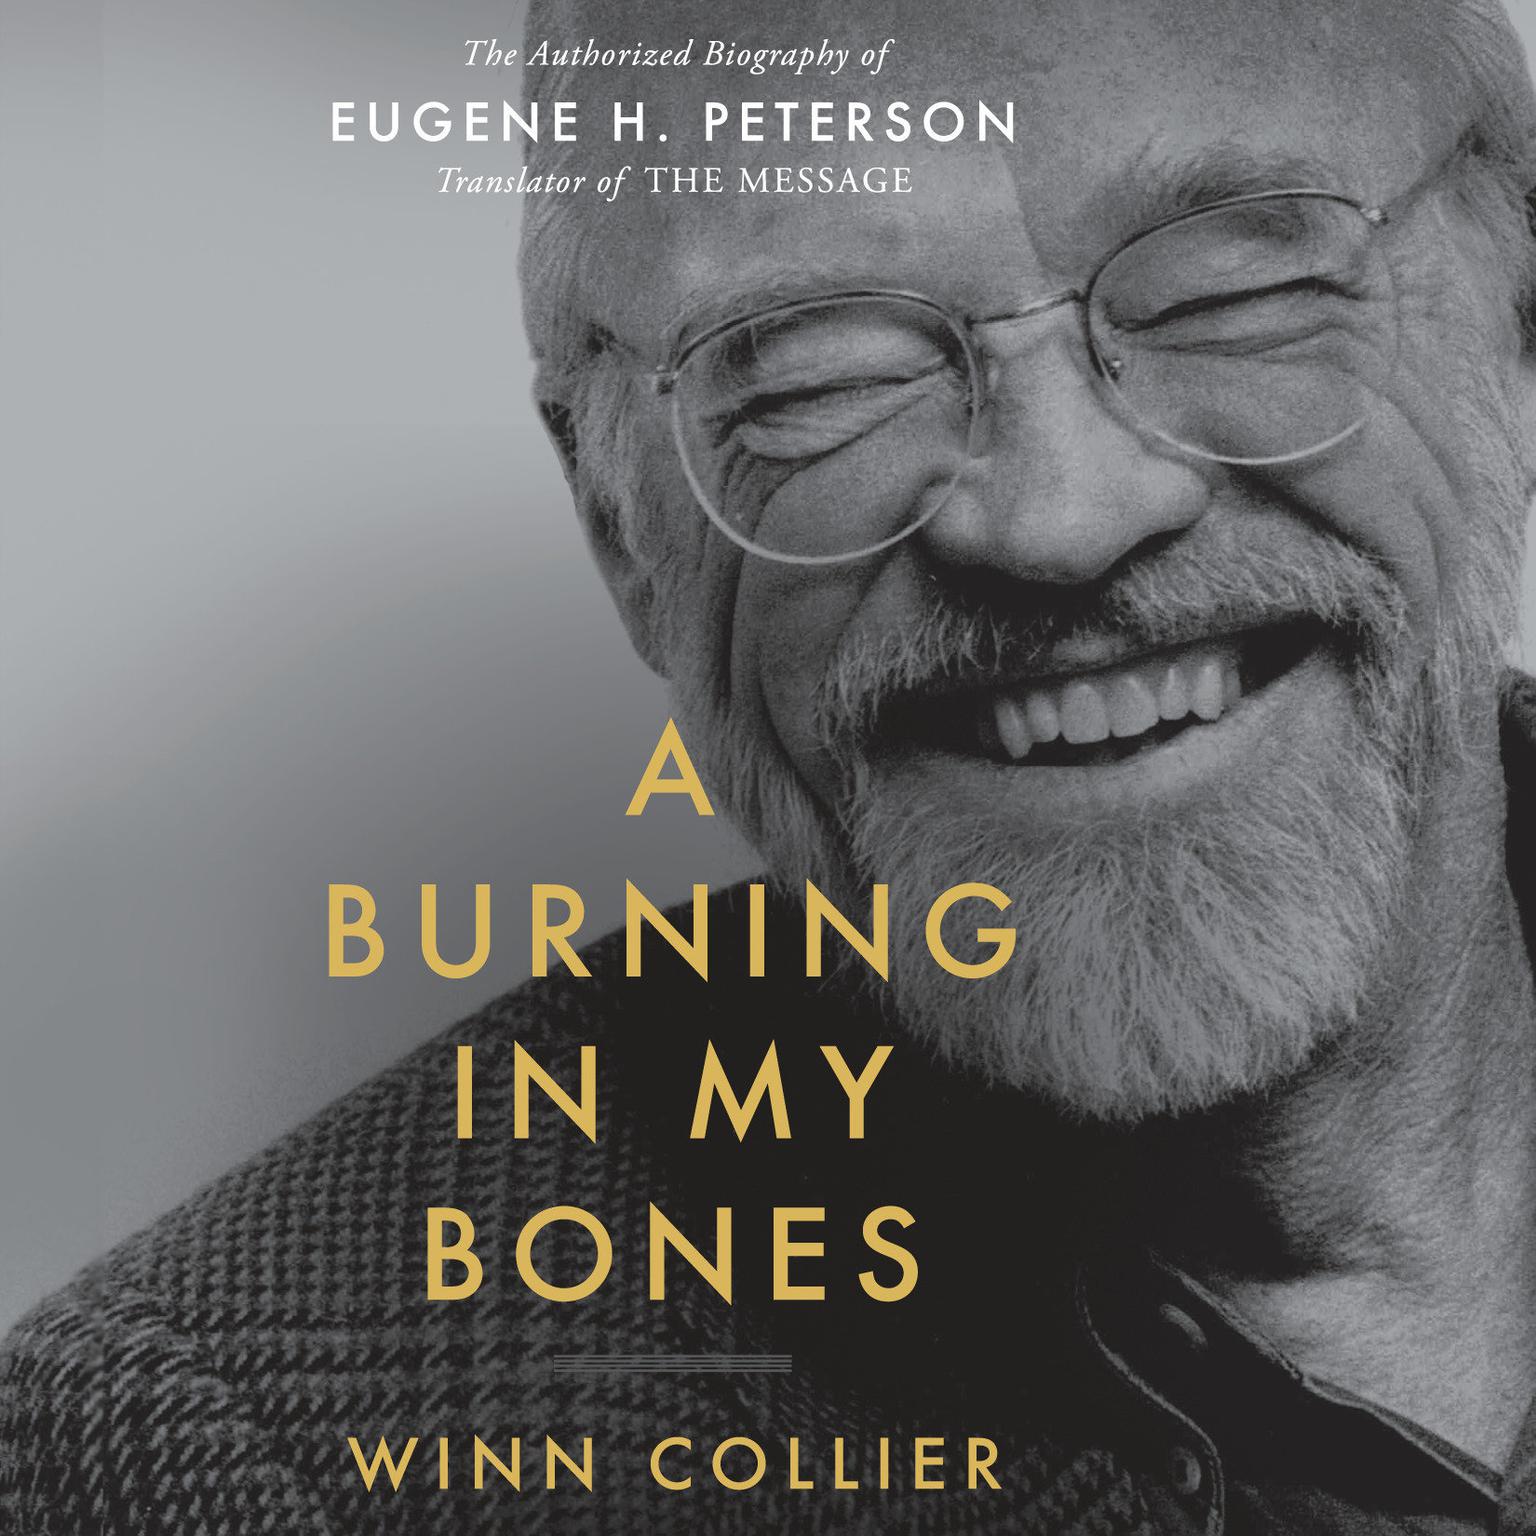 A Burning in My Bones: The Authorized Biography of Eugene H. Peterson, Translator of The Message Audiobook, by Winn Collier